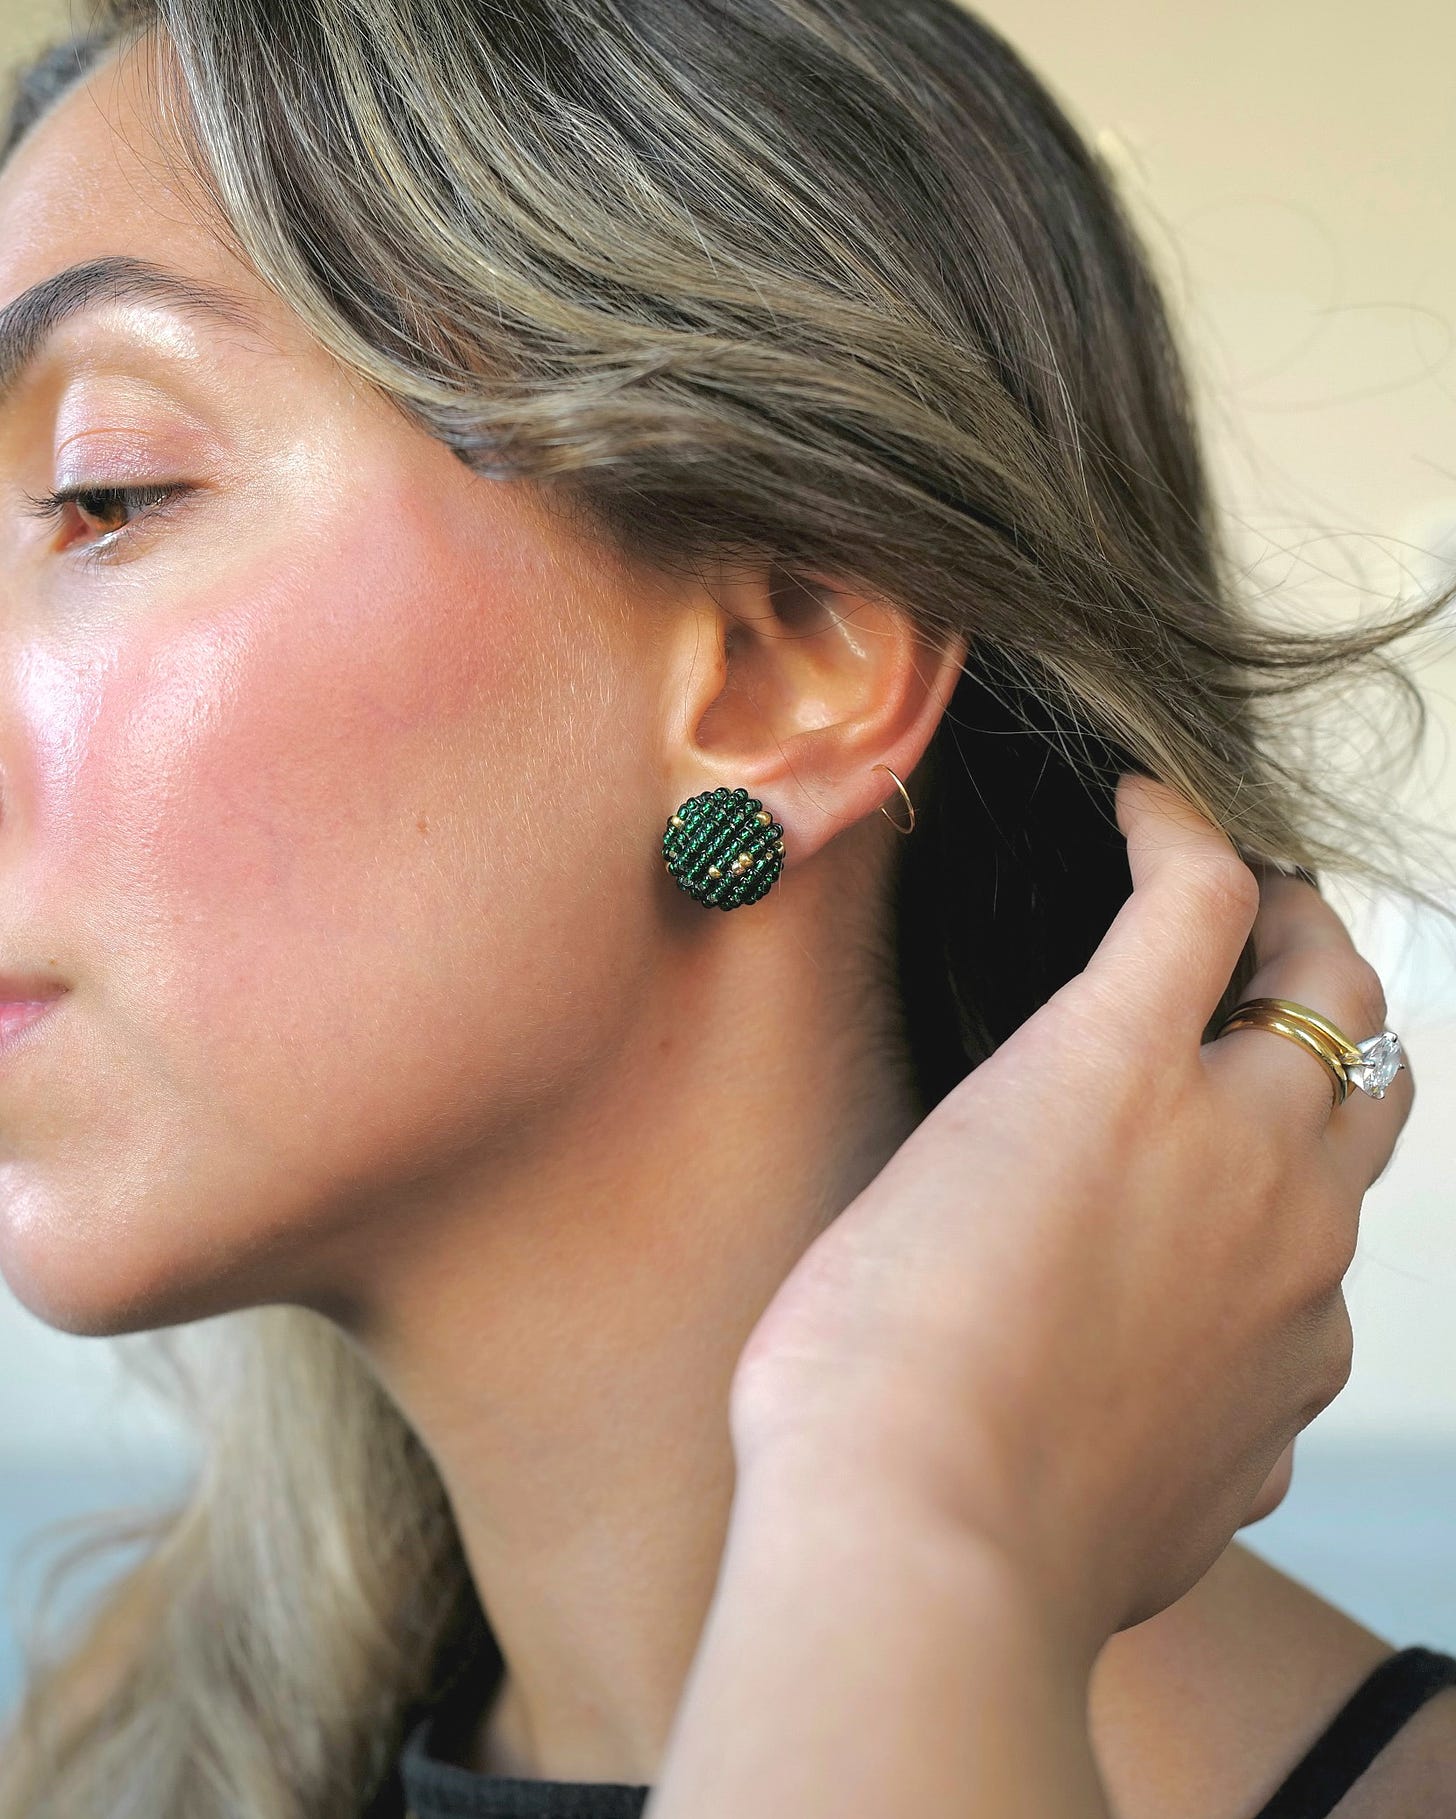 Emerald green earring being shown in close-up profile